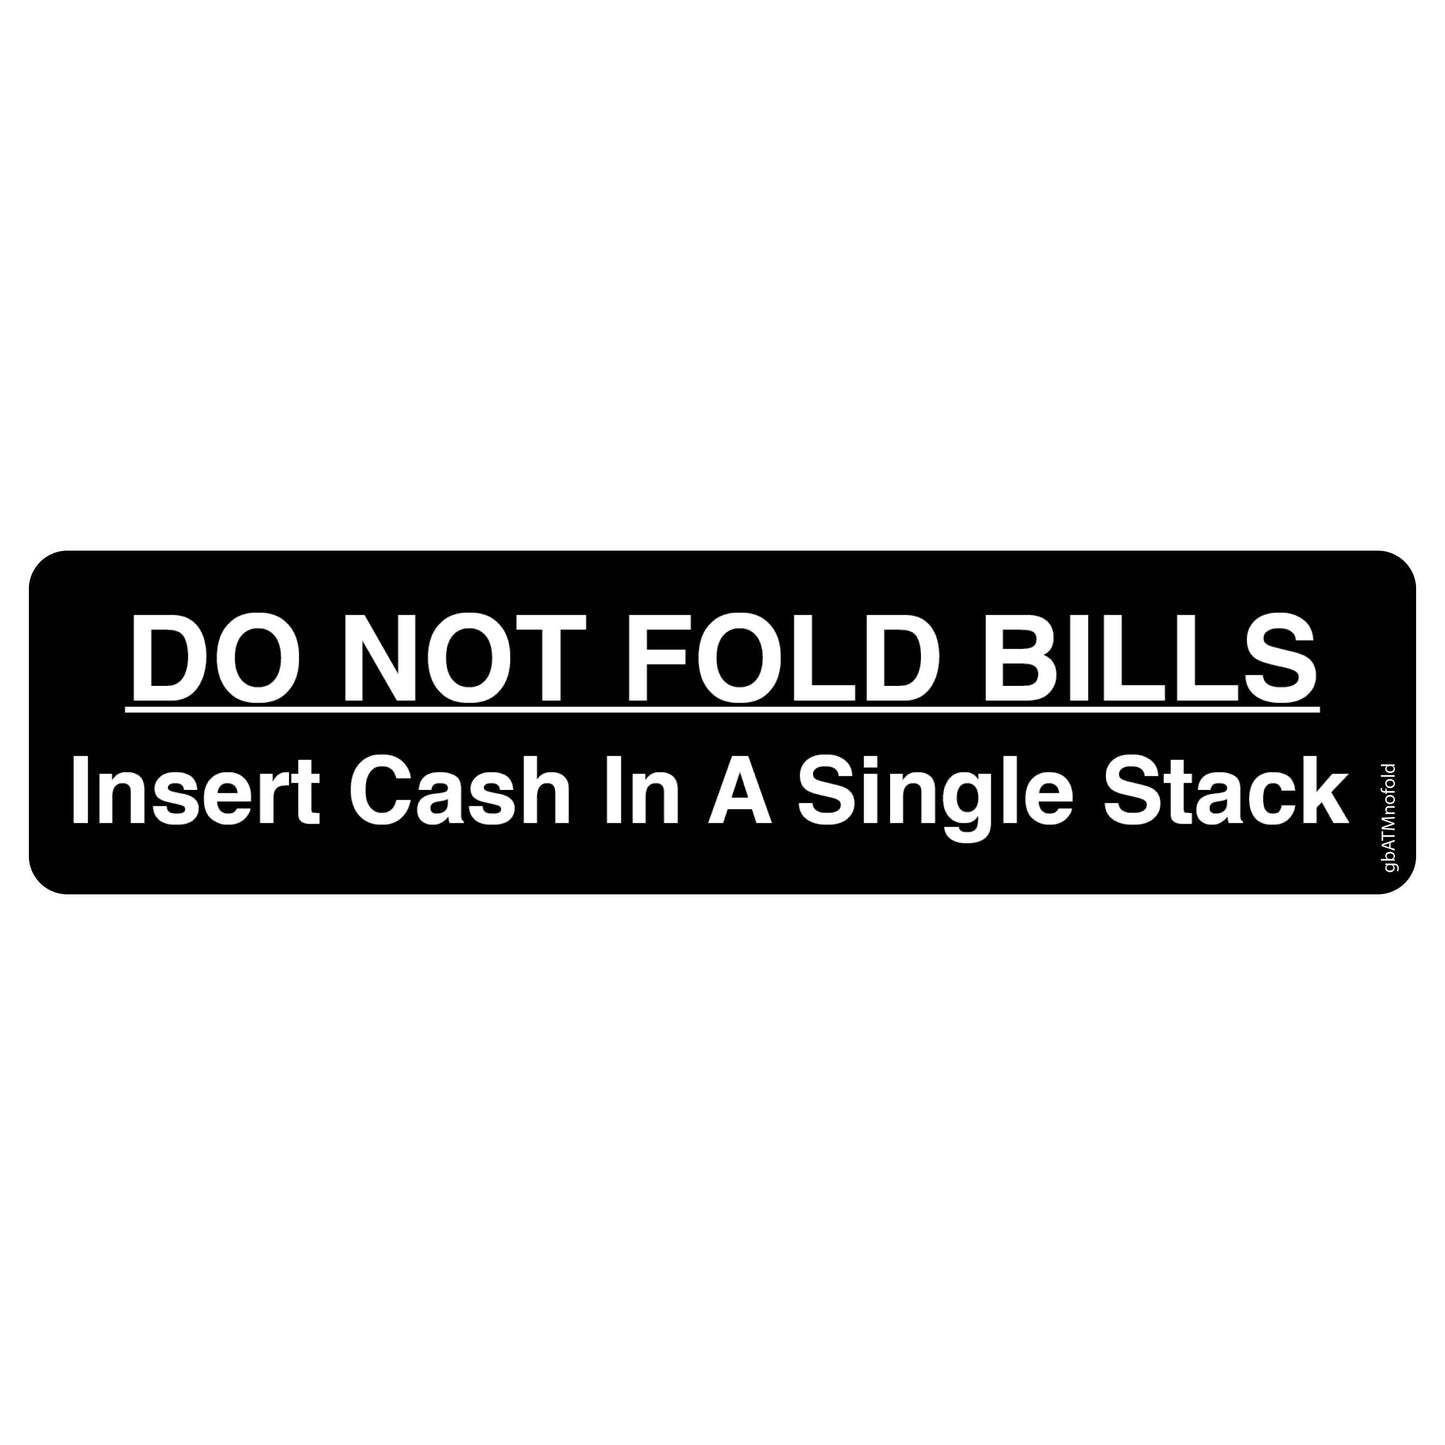 Do Not Fold Bills Decal. 6 inches by 1.5 inches in size. 